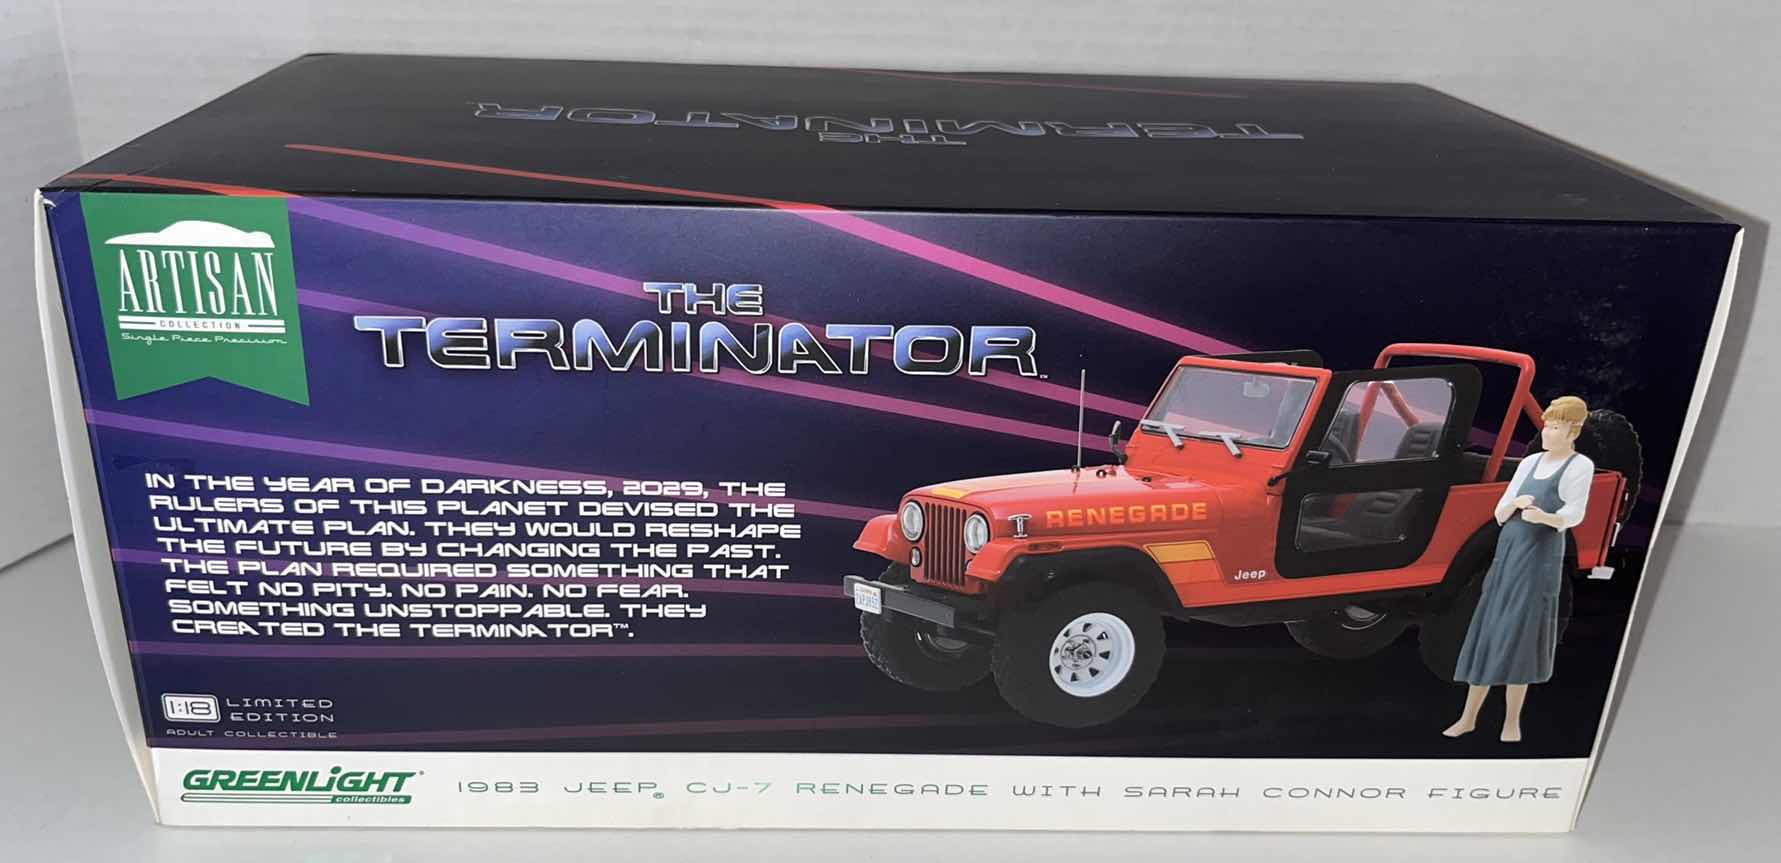 Photo 3 of BRAND NEW GREENLIGHT COLLECTIBLES ARTISAN COLLECTION LIMITED EDITION THE TERMINATOR 1983 JEEP CJ-7 RENEGADE W SARAH CONNOR FIGURE (1)